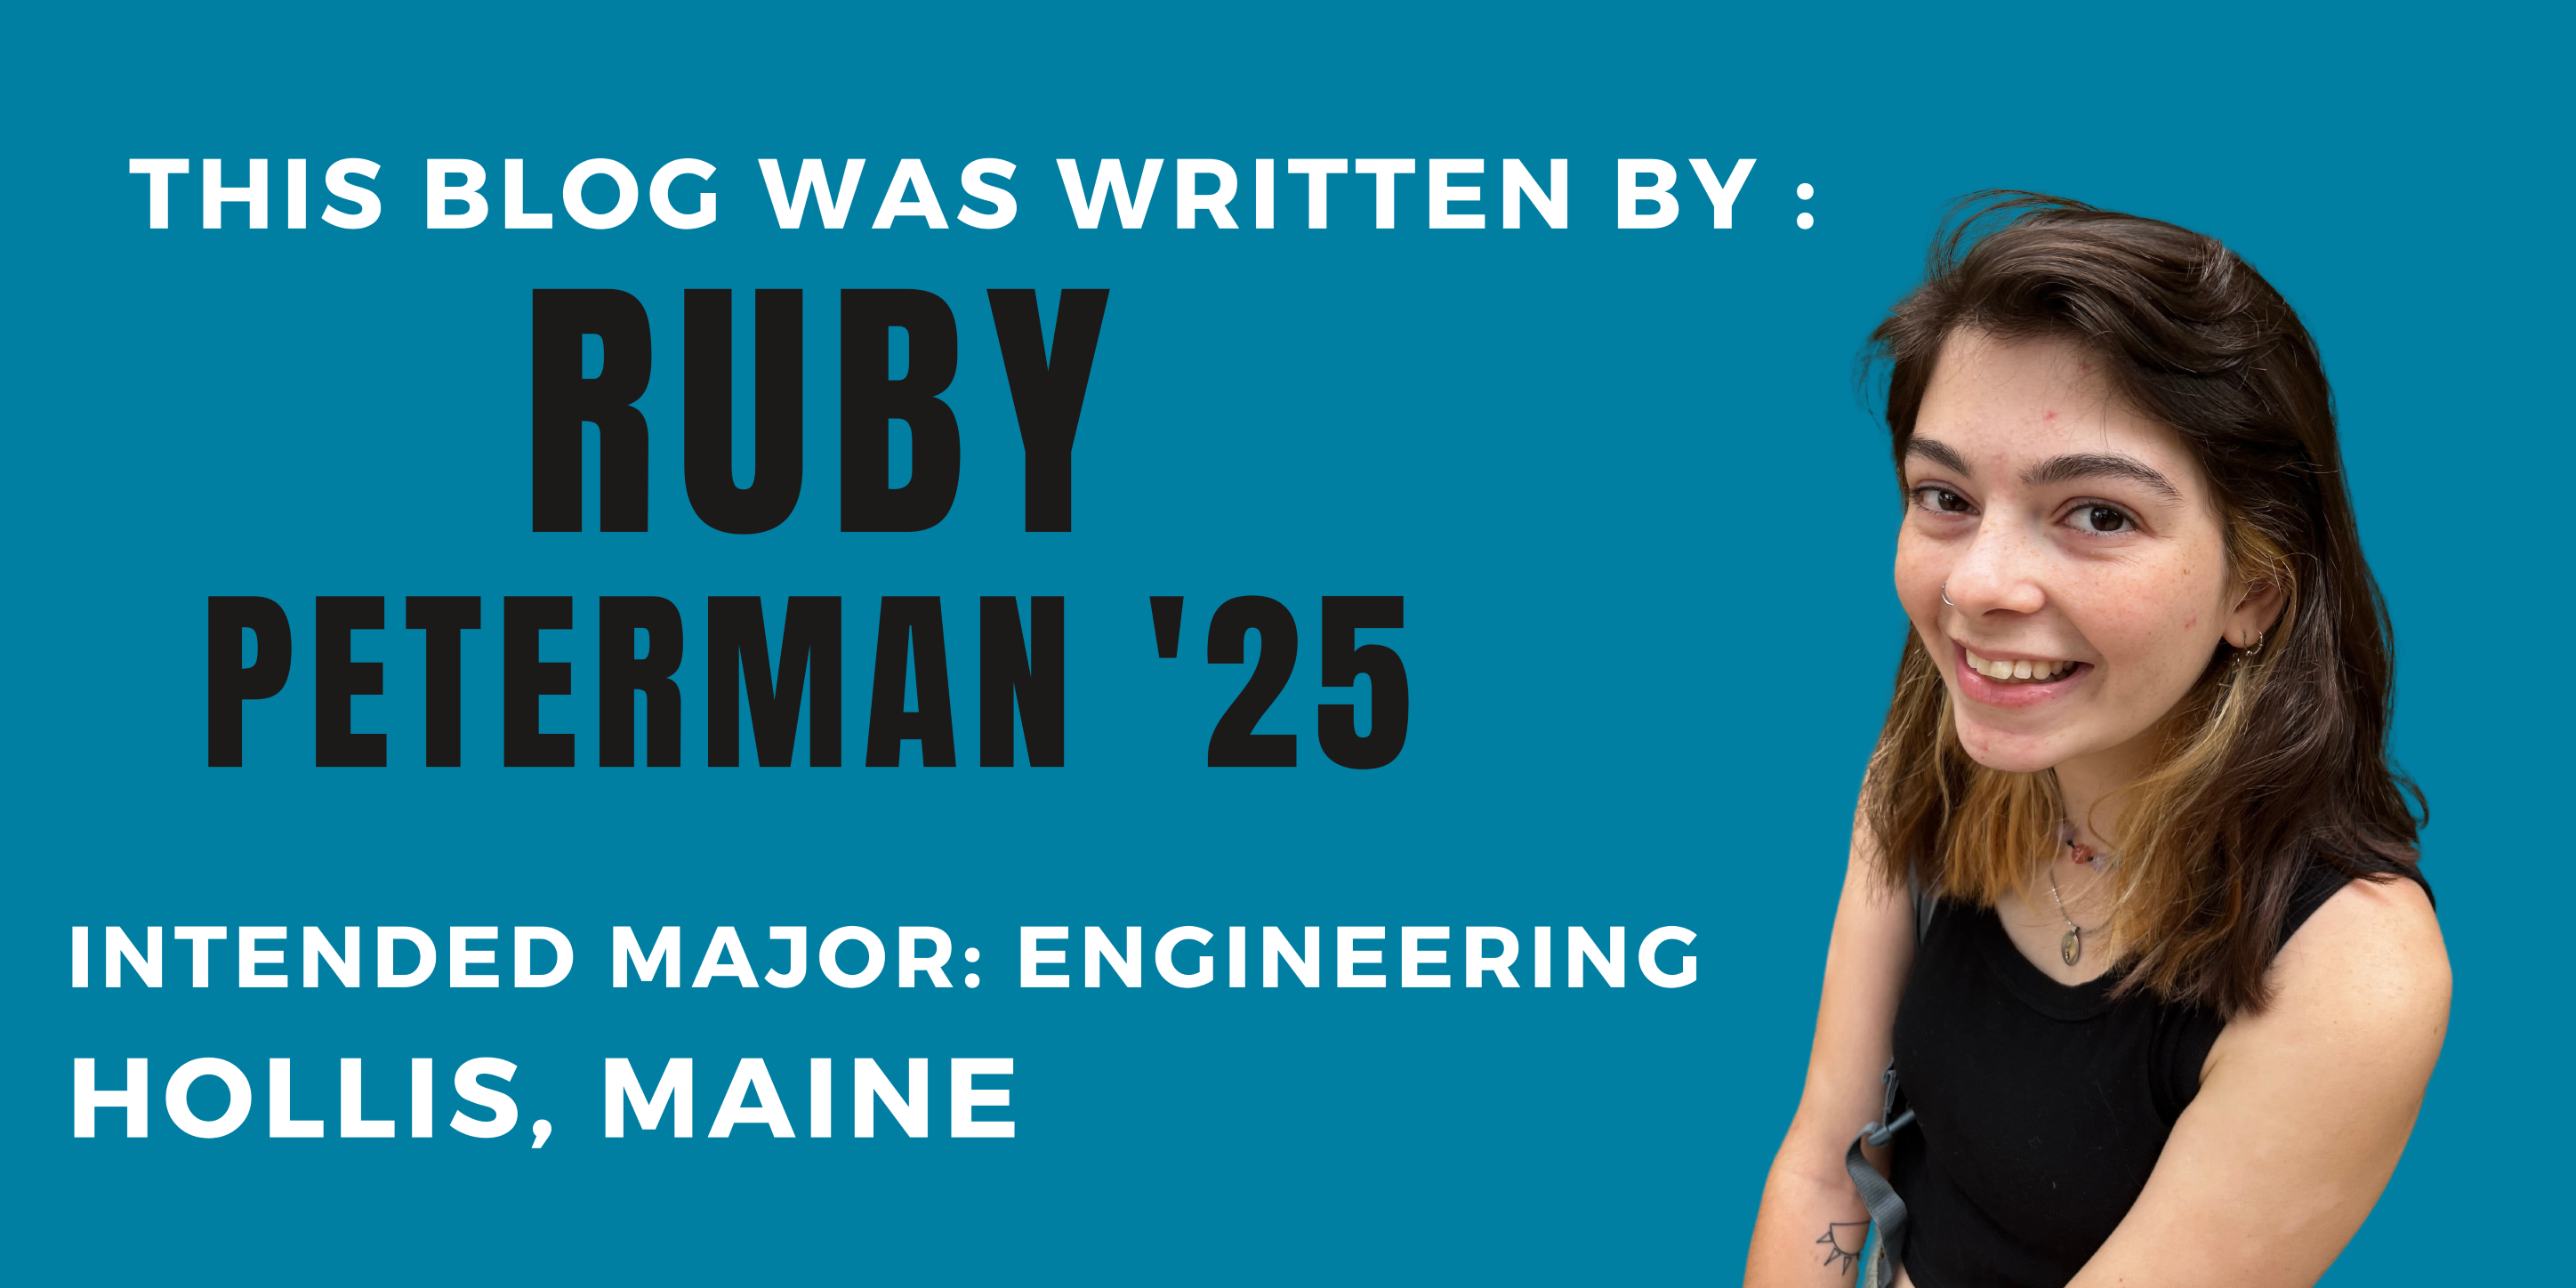 This blog was written by: Ruby Peterman '25; Intended Makor Engineering; Hollis, Maine